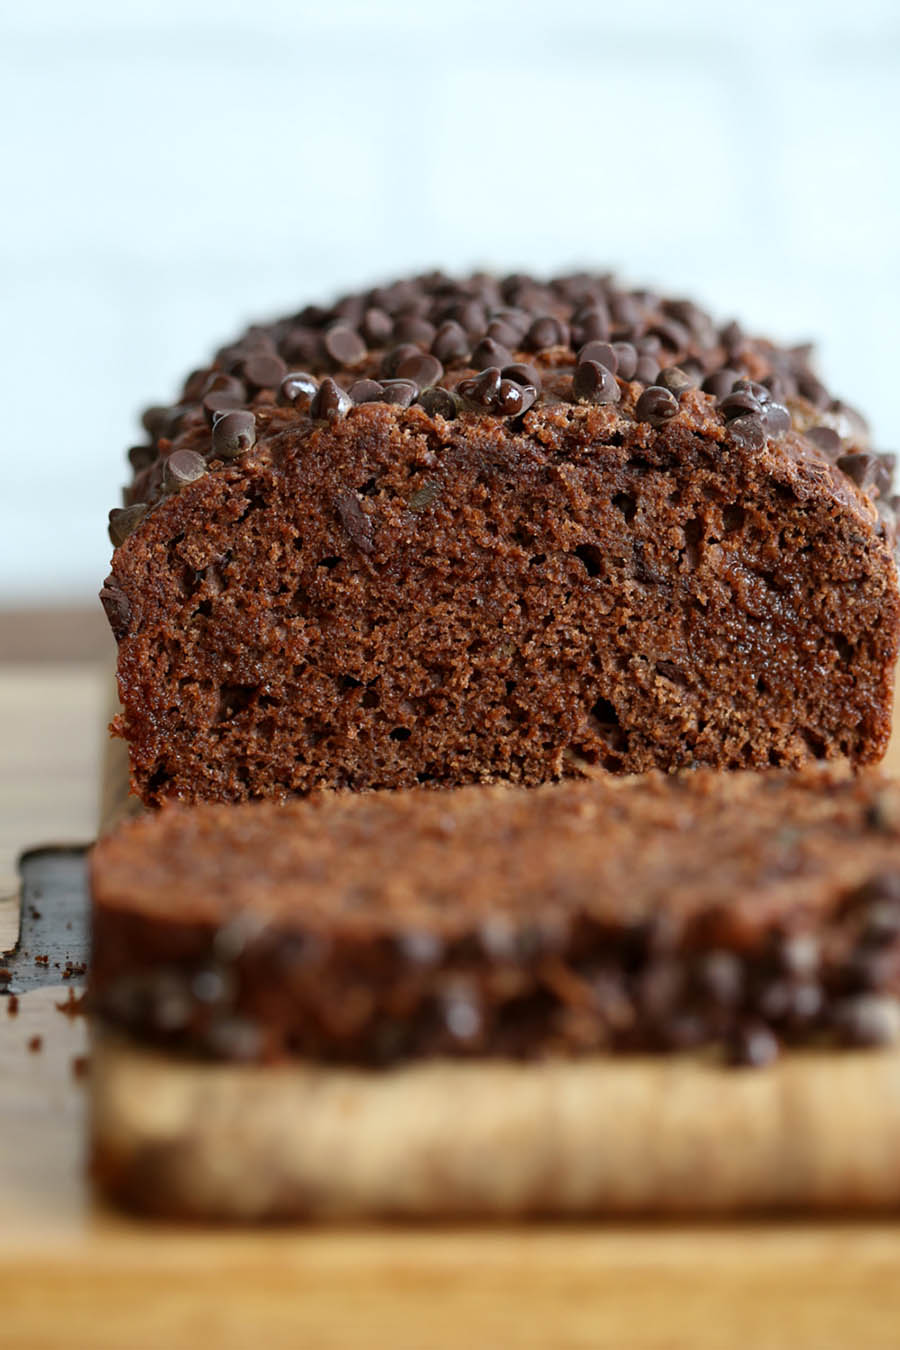 A close up of a loaf of chocolate gingerbread cake sliced open sitting on a wooden cutting board.